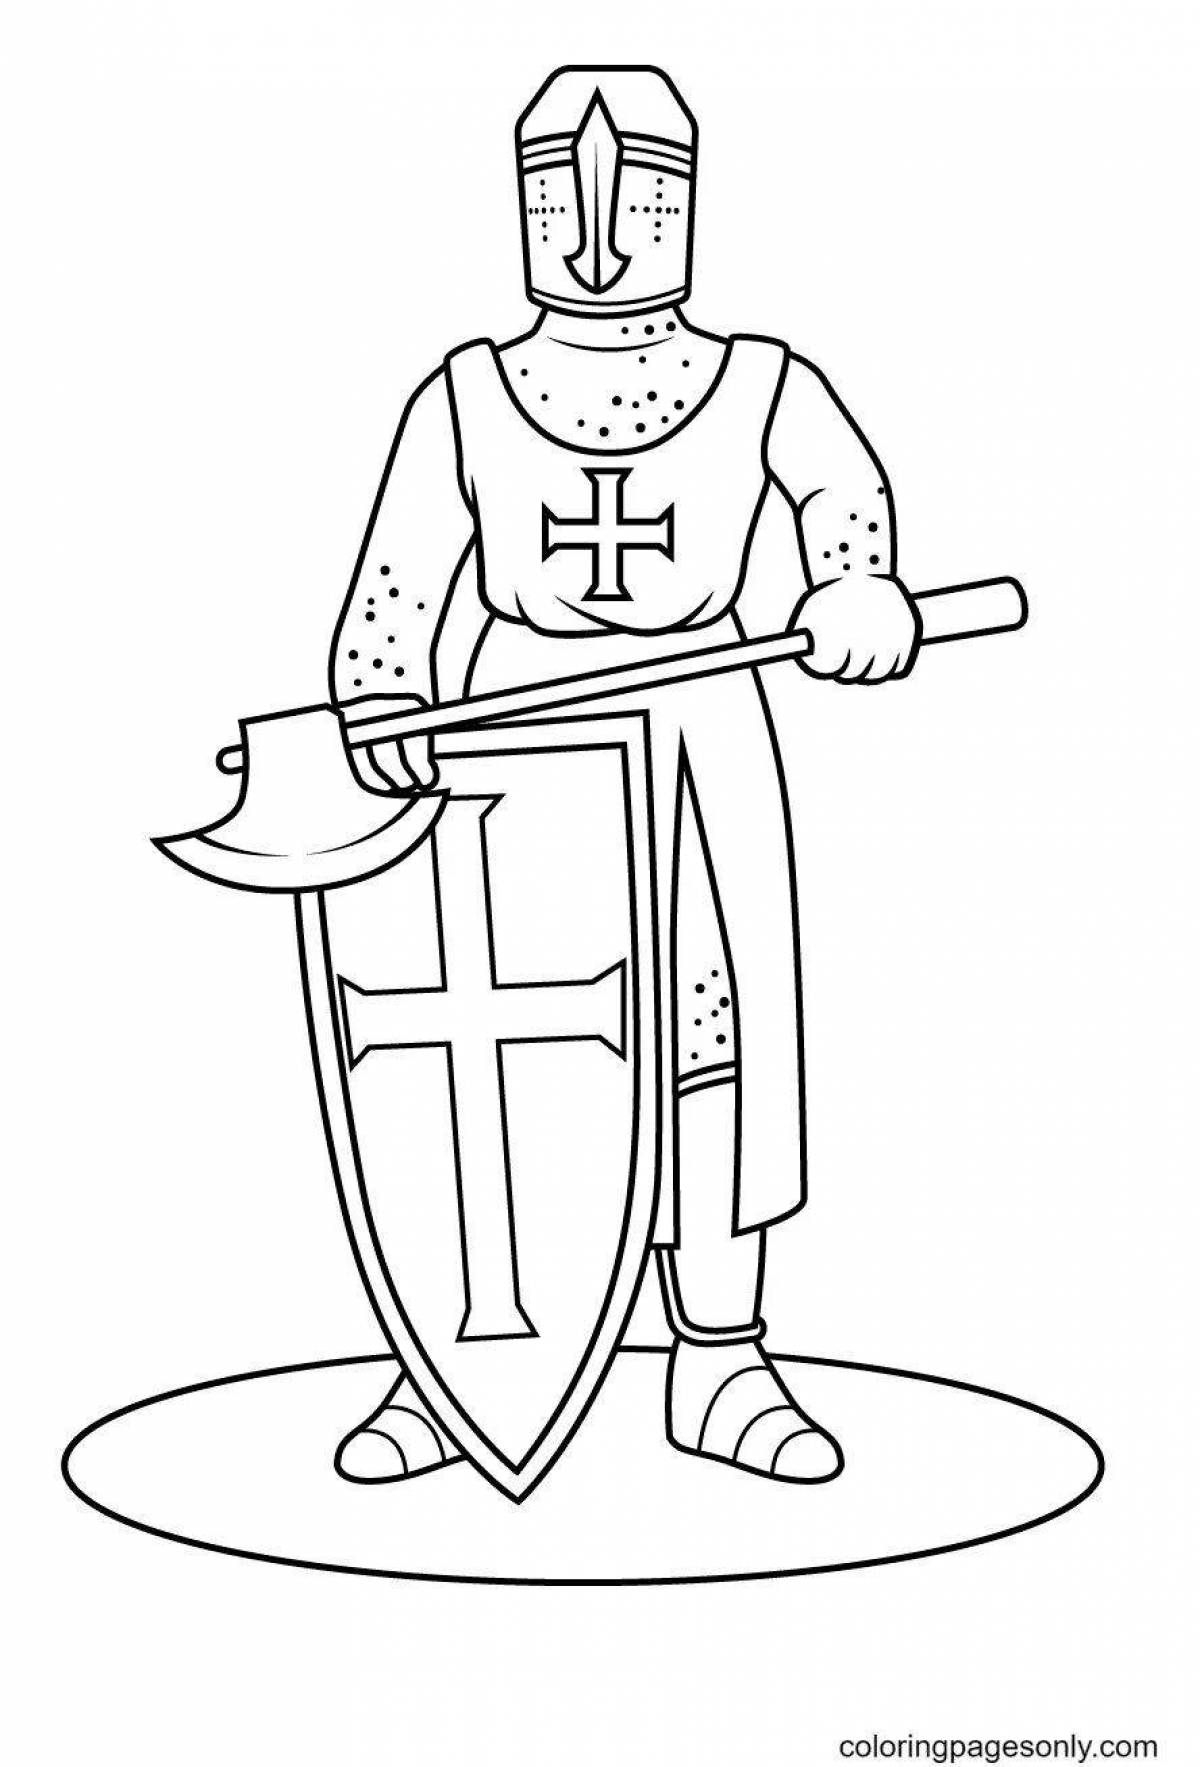 Ornate knight coloring book for kids